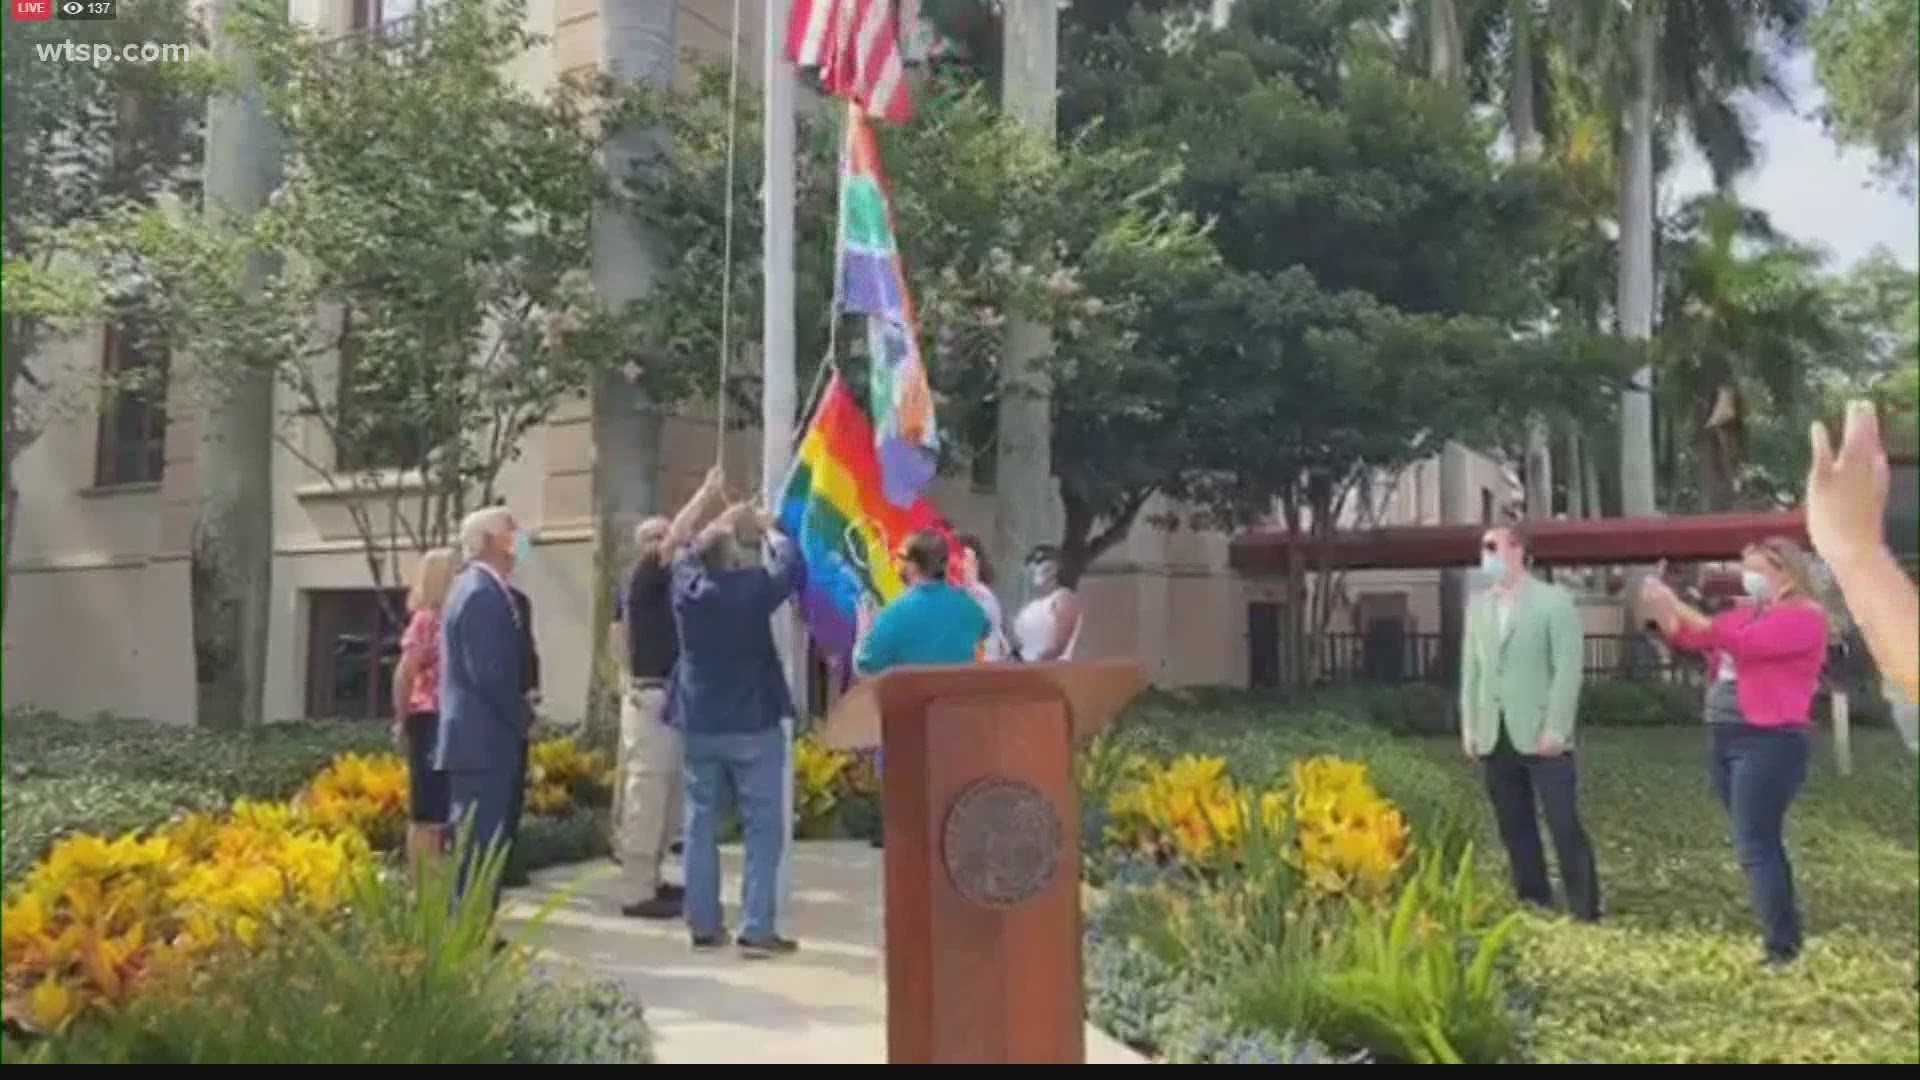 St. Petersburg Mayor Rick Kriseman raised the rainbow flag over City Hall Monday, signaling the official start of Pride month.